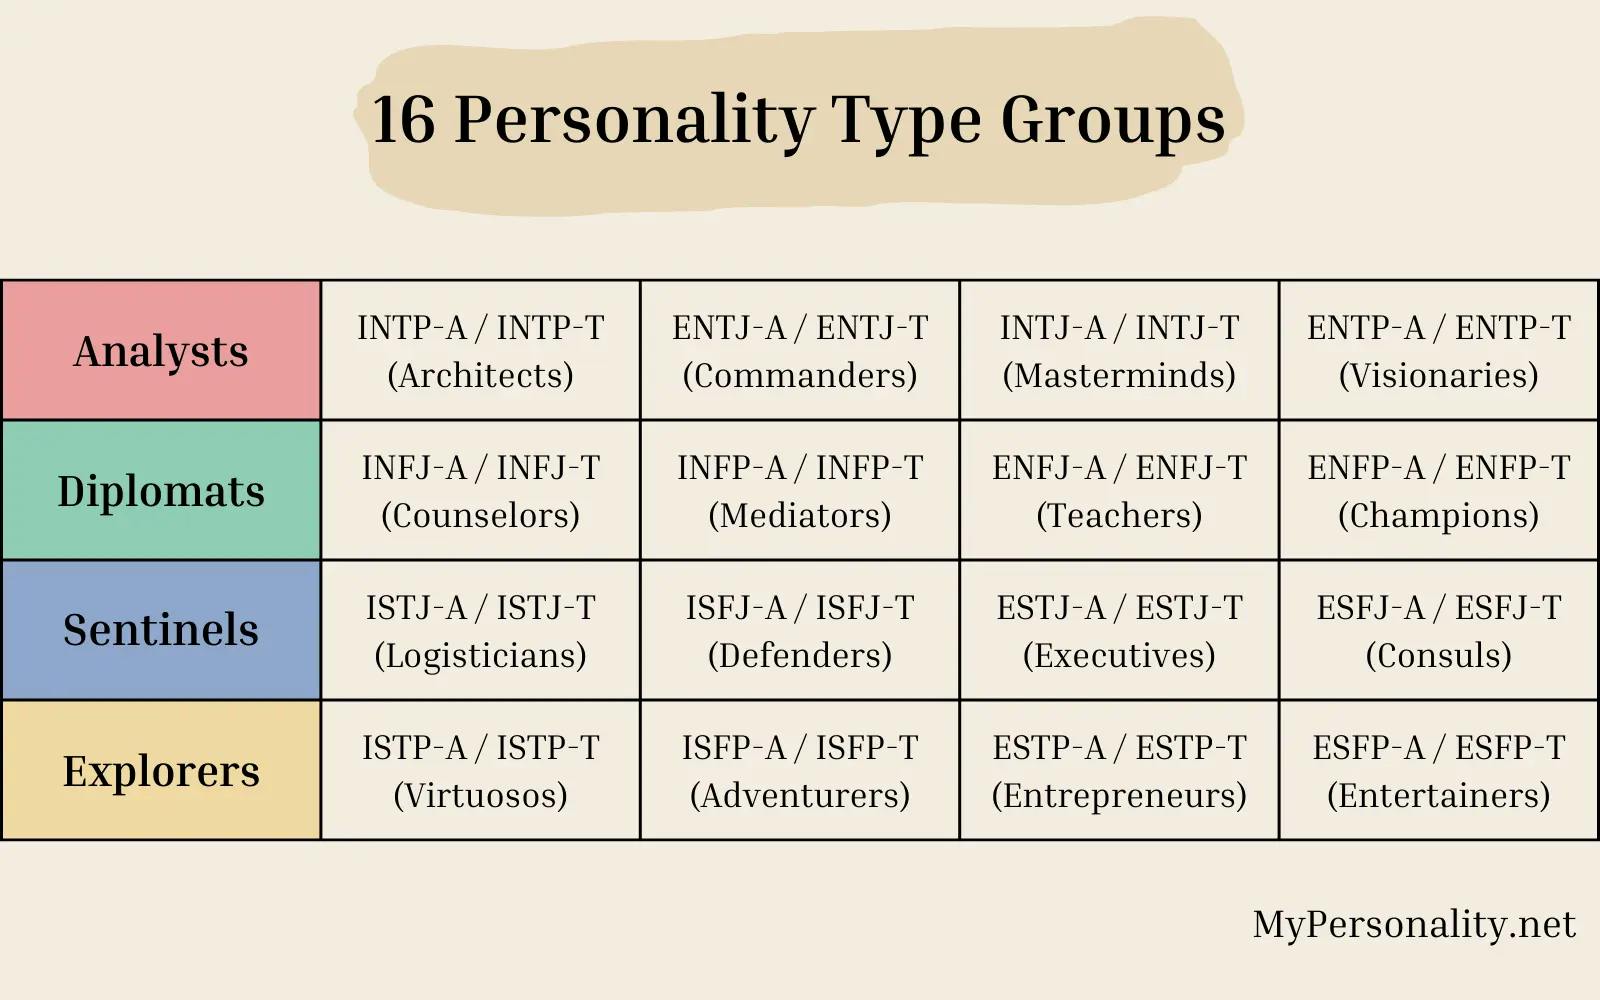 16 personality type groups